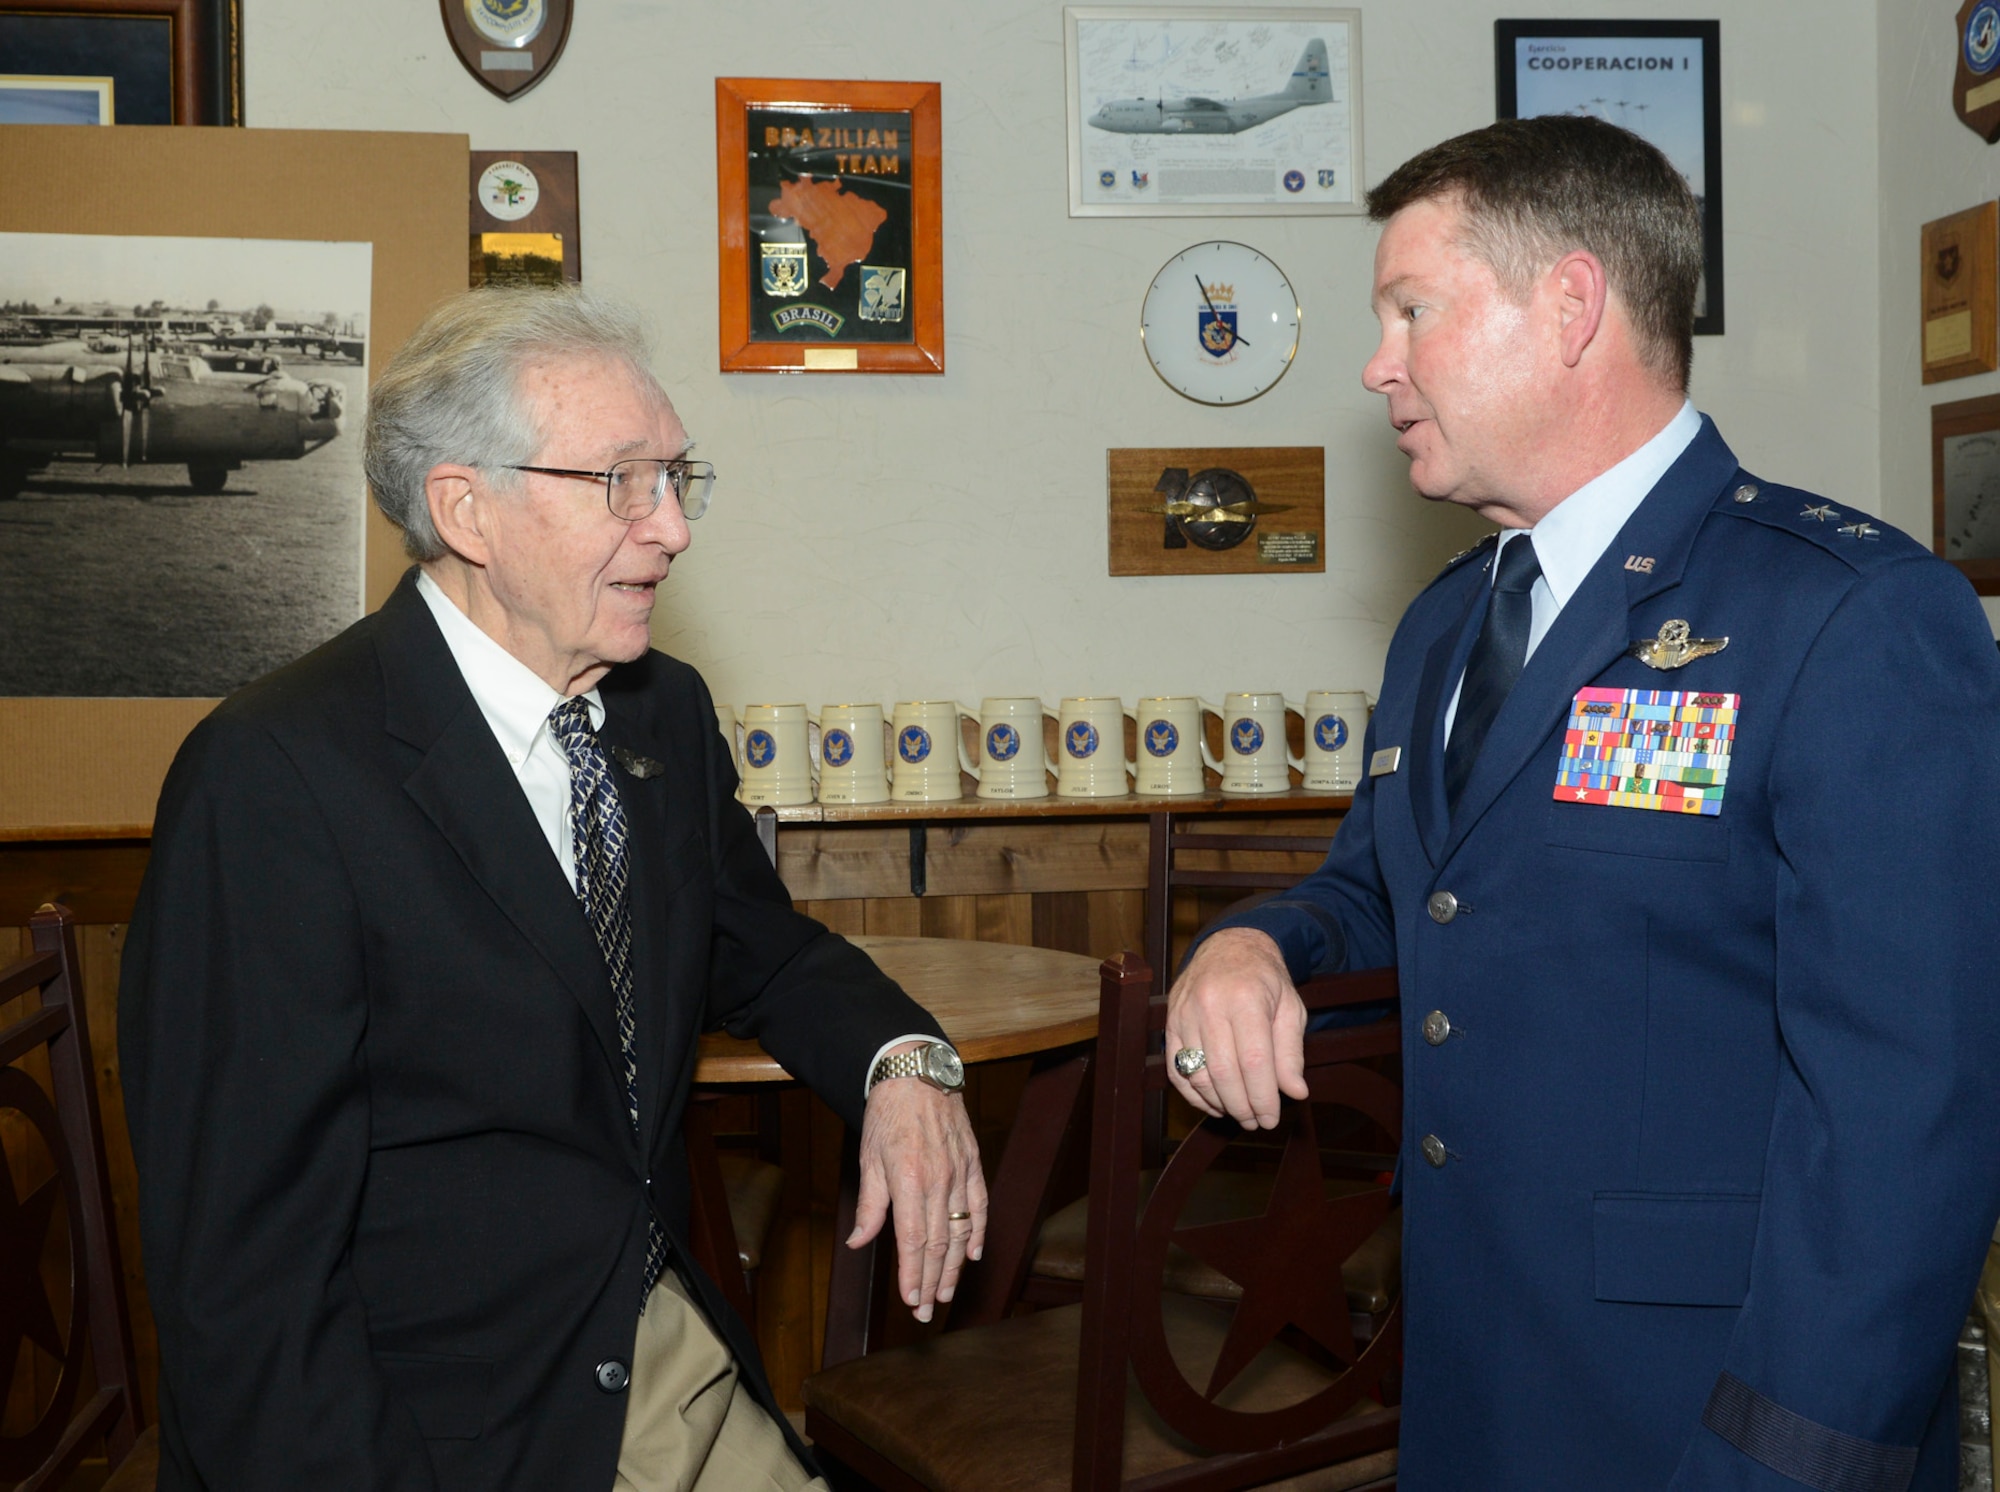 U.S. Air Force Maj. Gen. John F. Nichols, Texas adjutant general and commander, Texas Military Forces discusses the 28th mission of Thomas P. Faulkner, a former pilot and 1st. Lt. of the U.S. Army Air Forces’ 15th Air Force, in Italy during WWII where he earned his Distinguished Flying Cross in 1945. Faulkner is officially receiving his DFC 68 years after the fact at the 136th Airlift Wing, Naval Air Station Fort Worth Joint Reserve Base, Texas, Sept. 19, 2013. (Air National Guard photo by Senior Master Sgt. Elizabeth Gilbert/released)